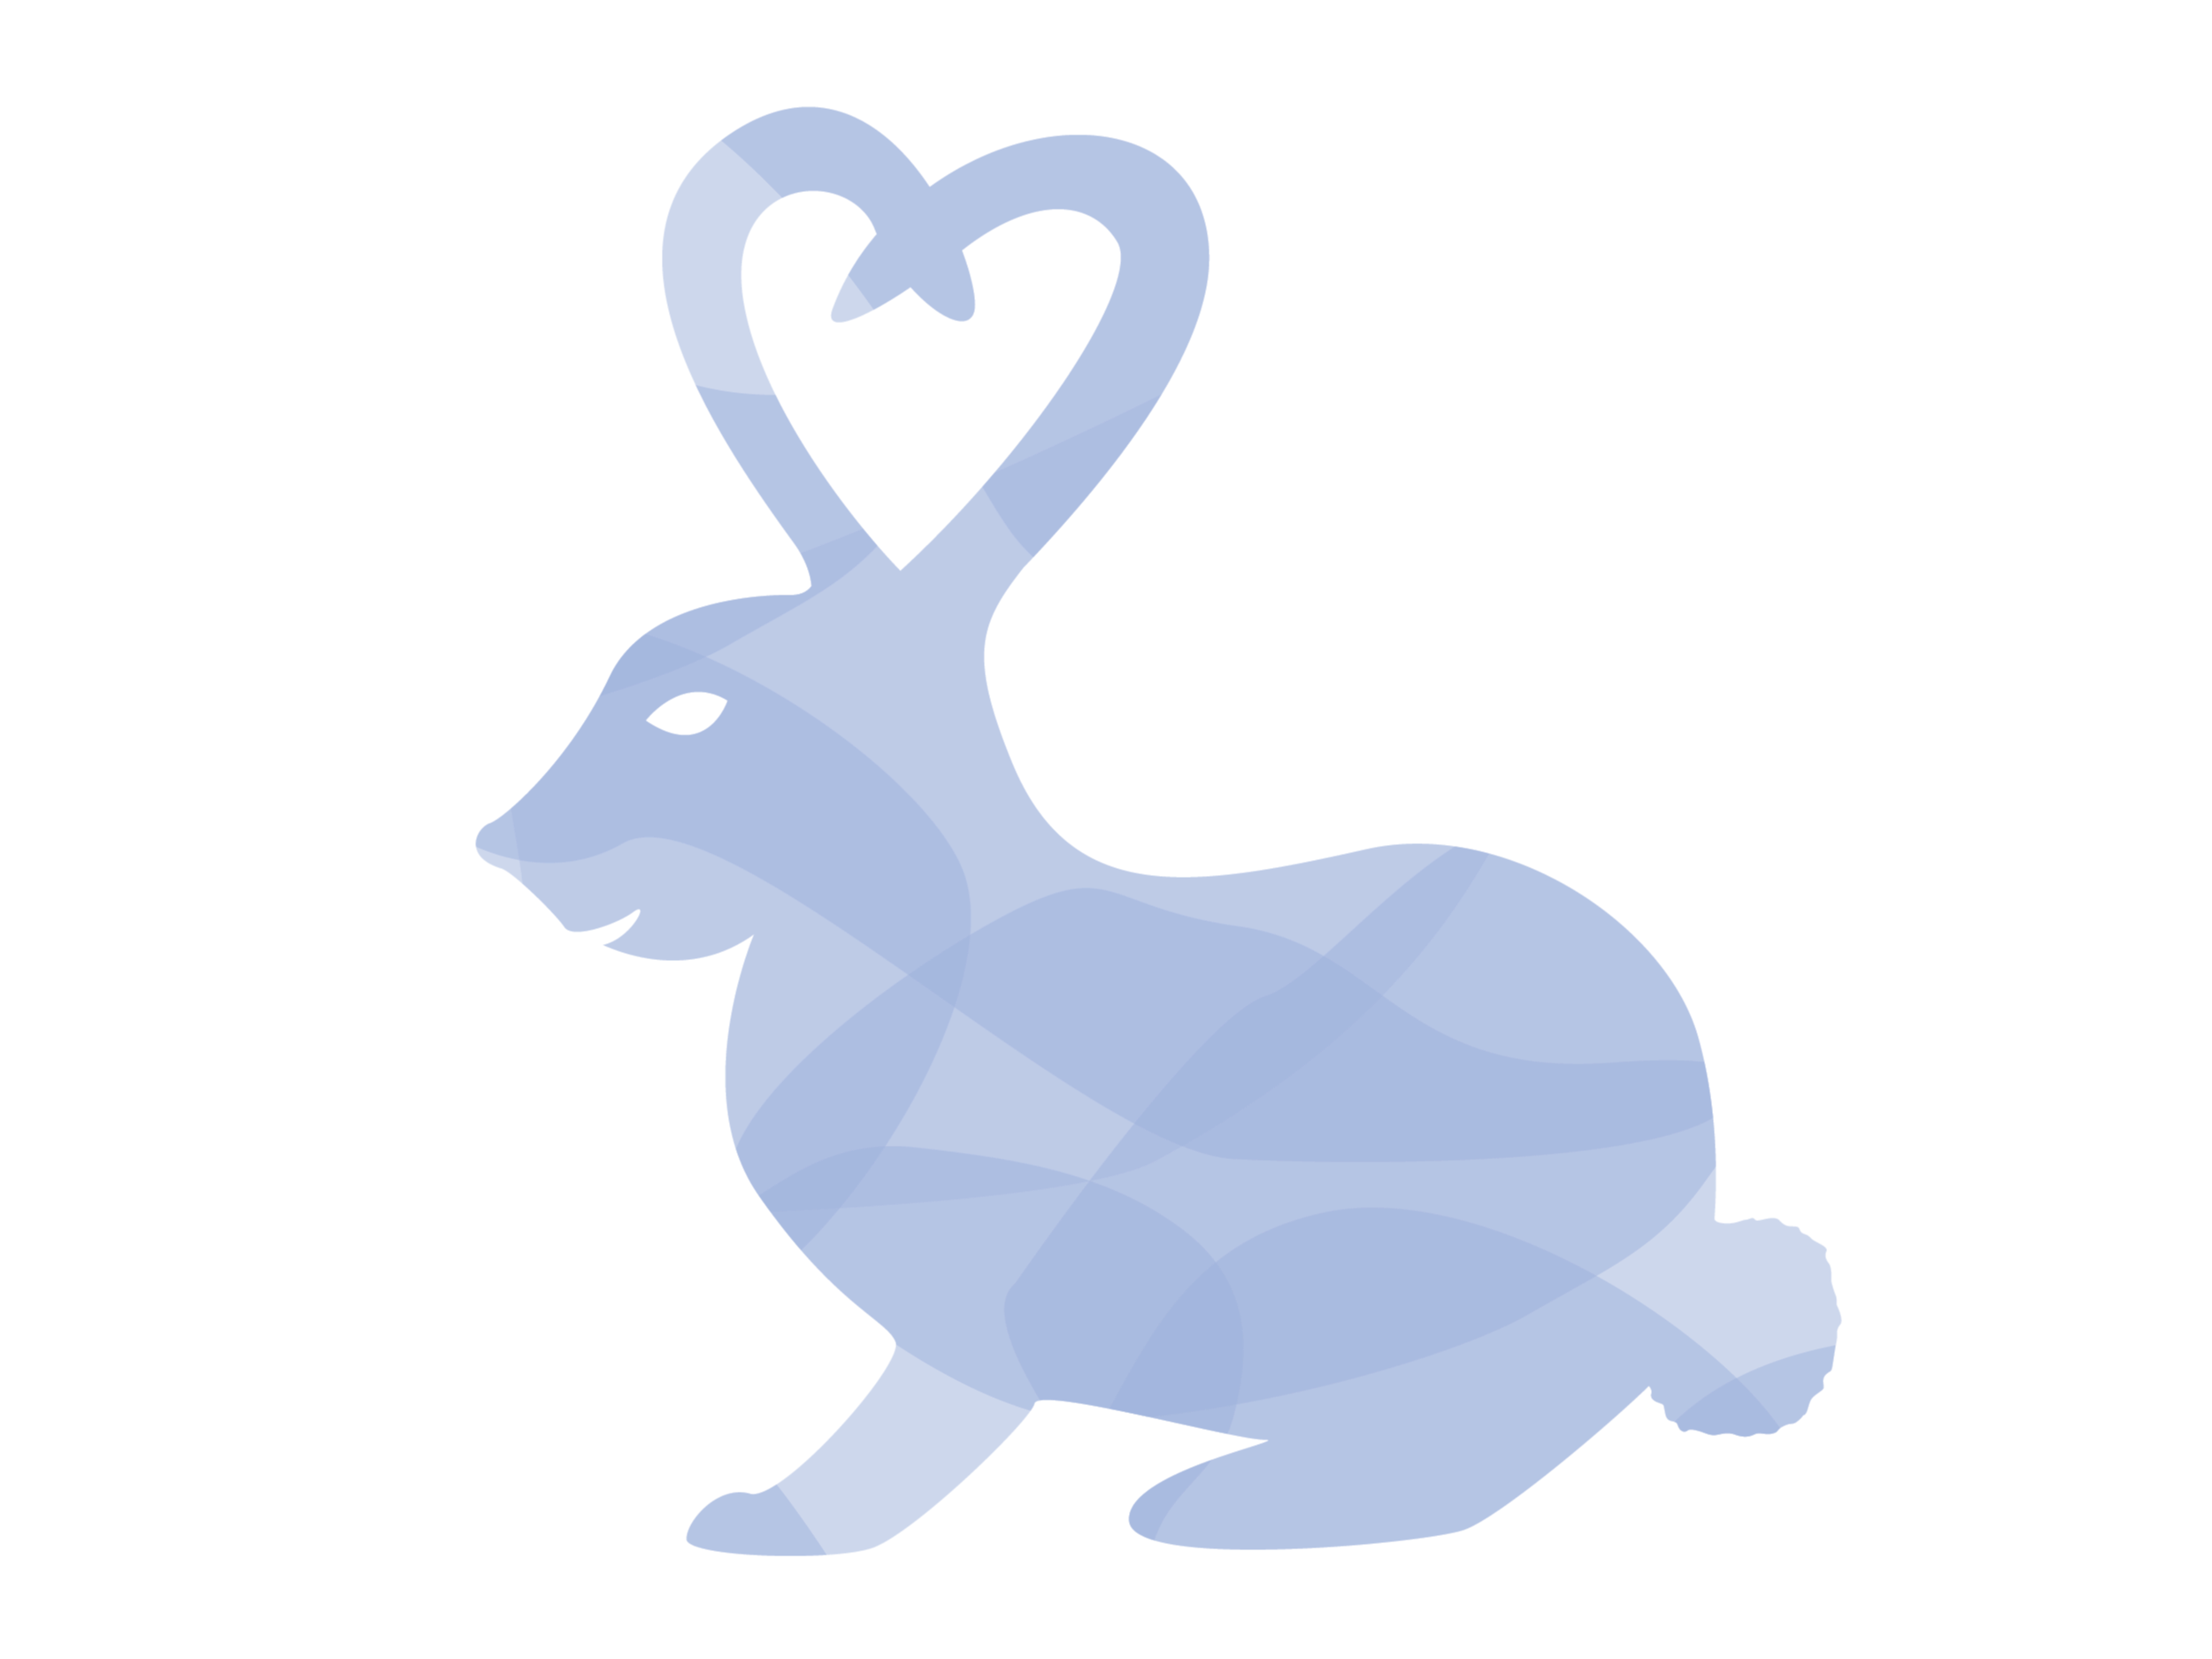 Illustration of blue bunny with ears up that make a heart shape